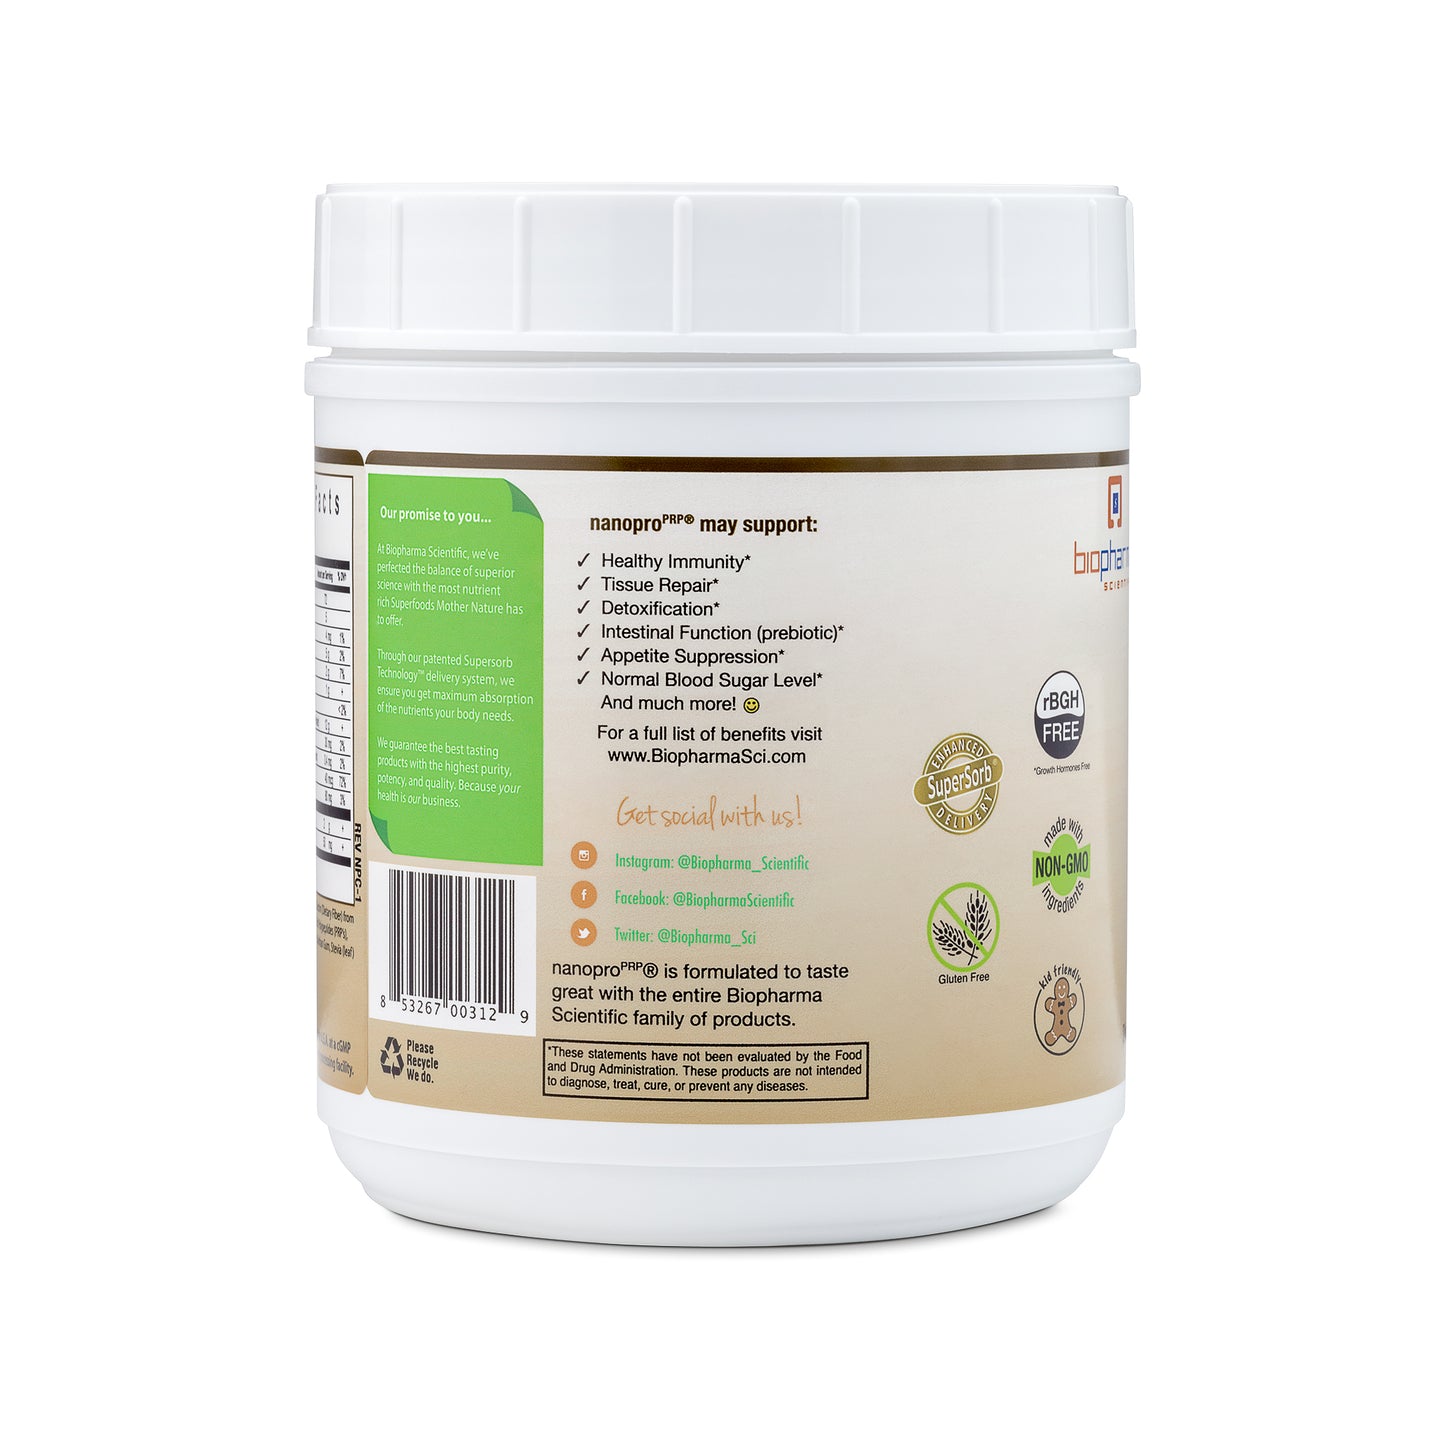 nanopro immune chocolate protein powder supplement with detox and recovery superfood - health benefits